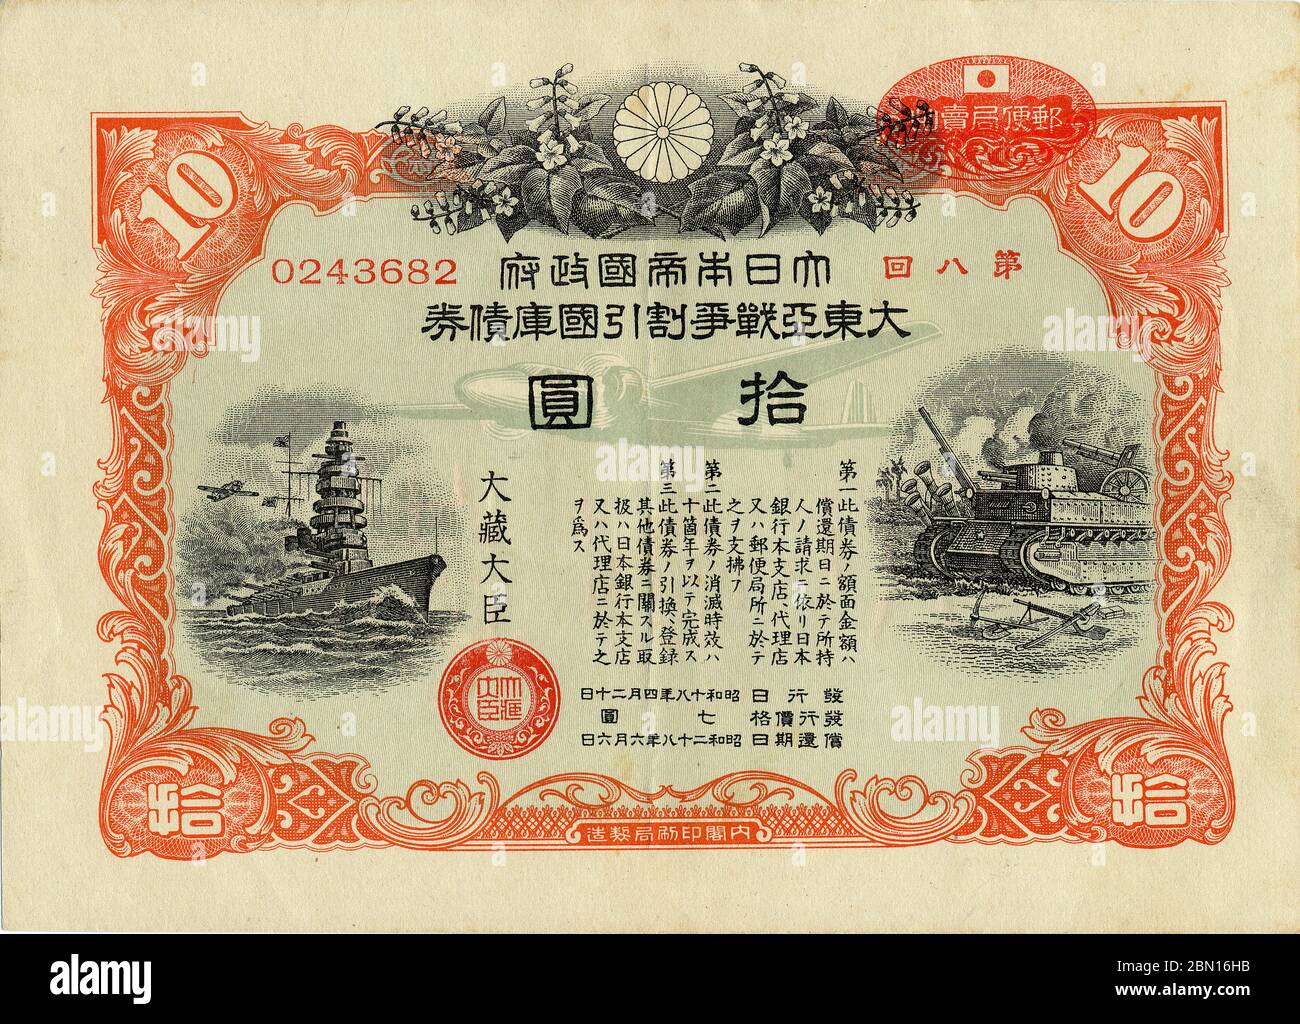 [ 1943 Japan - Japanese Pacific War Bond ] —   Pacific War Bond of 10 yen issued by the Imperial Government of Japan in 1943 (Showa 18), featuring a Japanese WWII navy ship, tank and warplane.  In the 1930s and 1940s, 'voluntary' savings were so greatly encouraged to finance the Japanese war effort that by 1944 (Showa 19) Japanese households were saving an incredible 39.5% of disposable income.  20th century vintage bond. Stock Photo